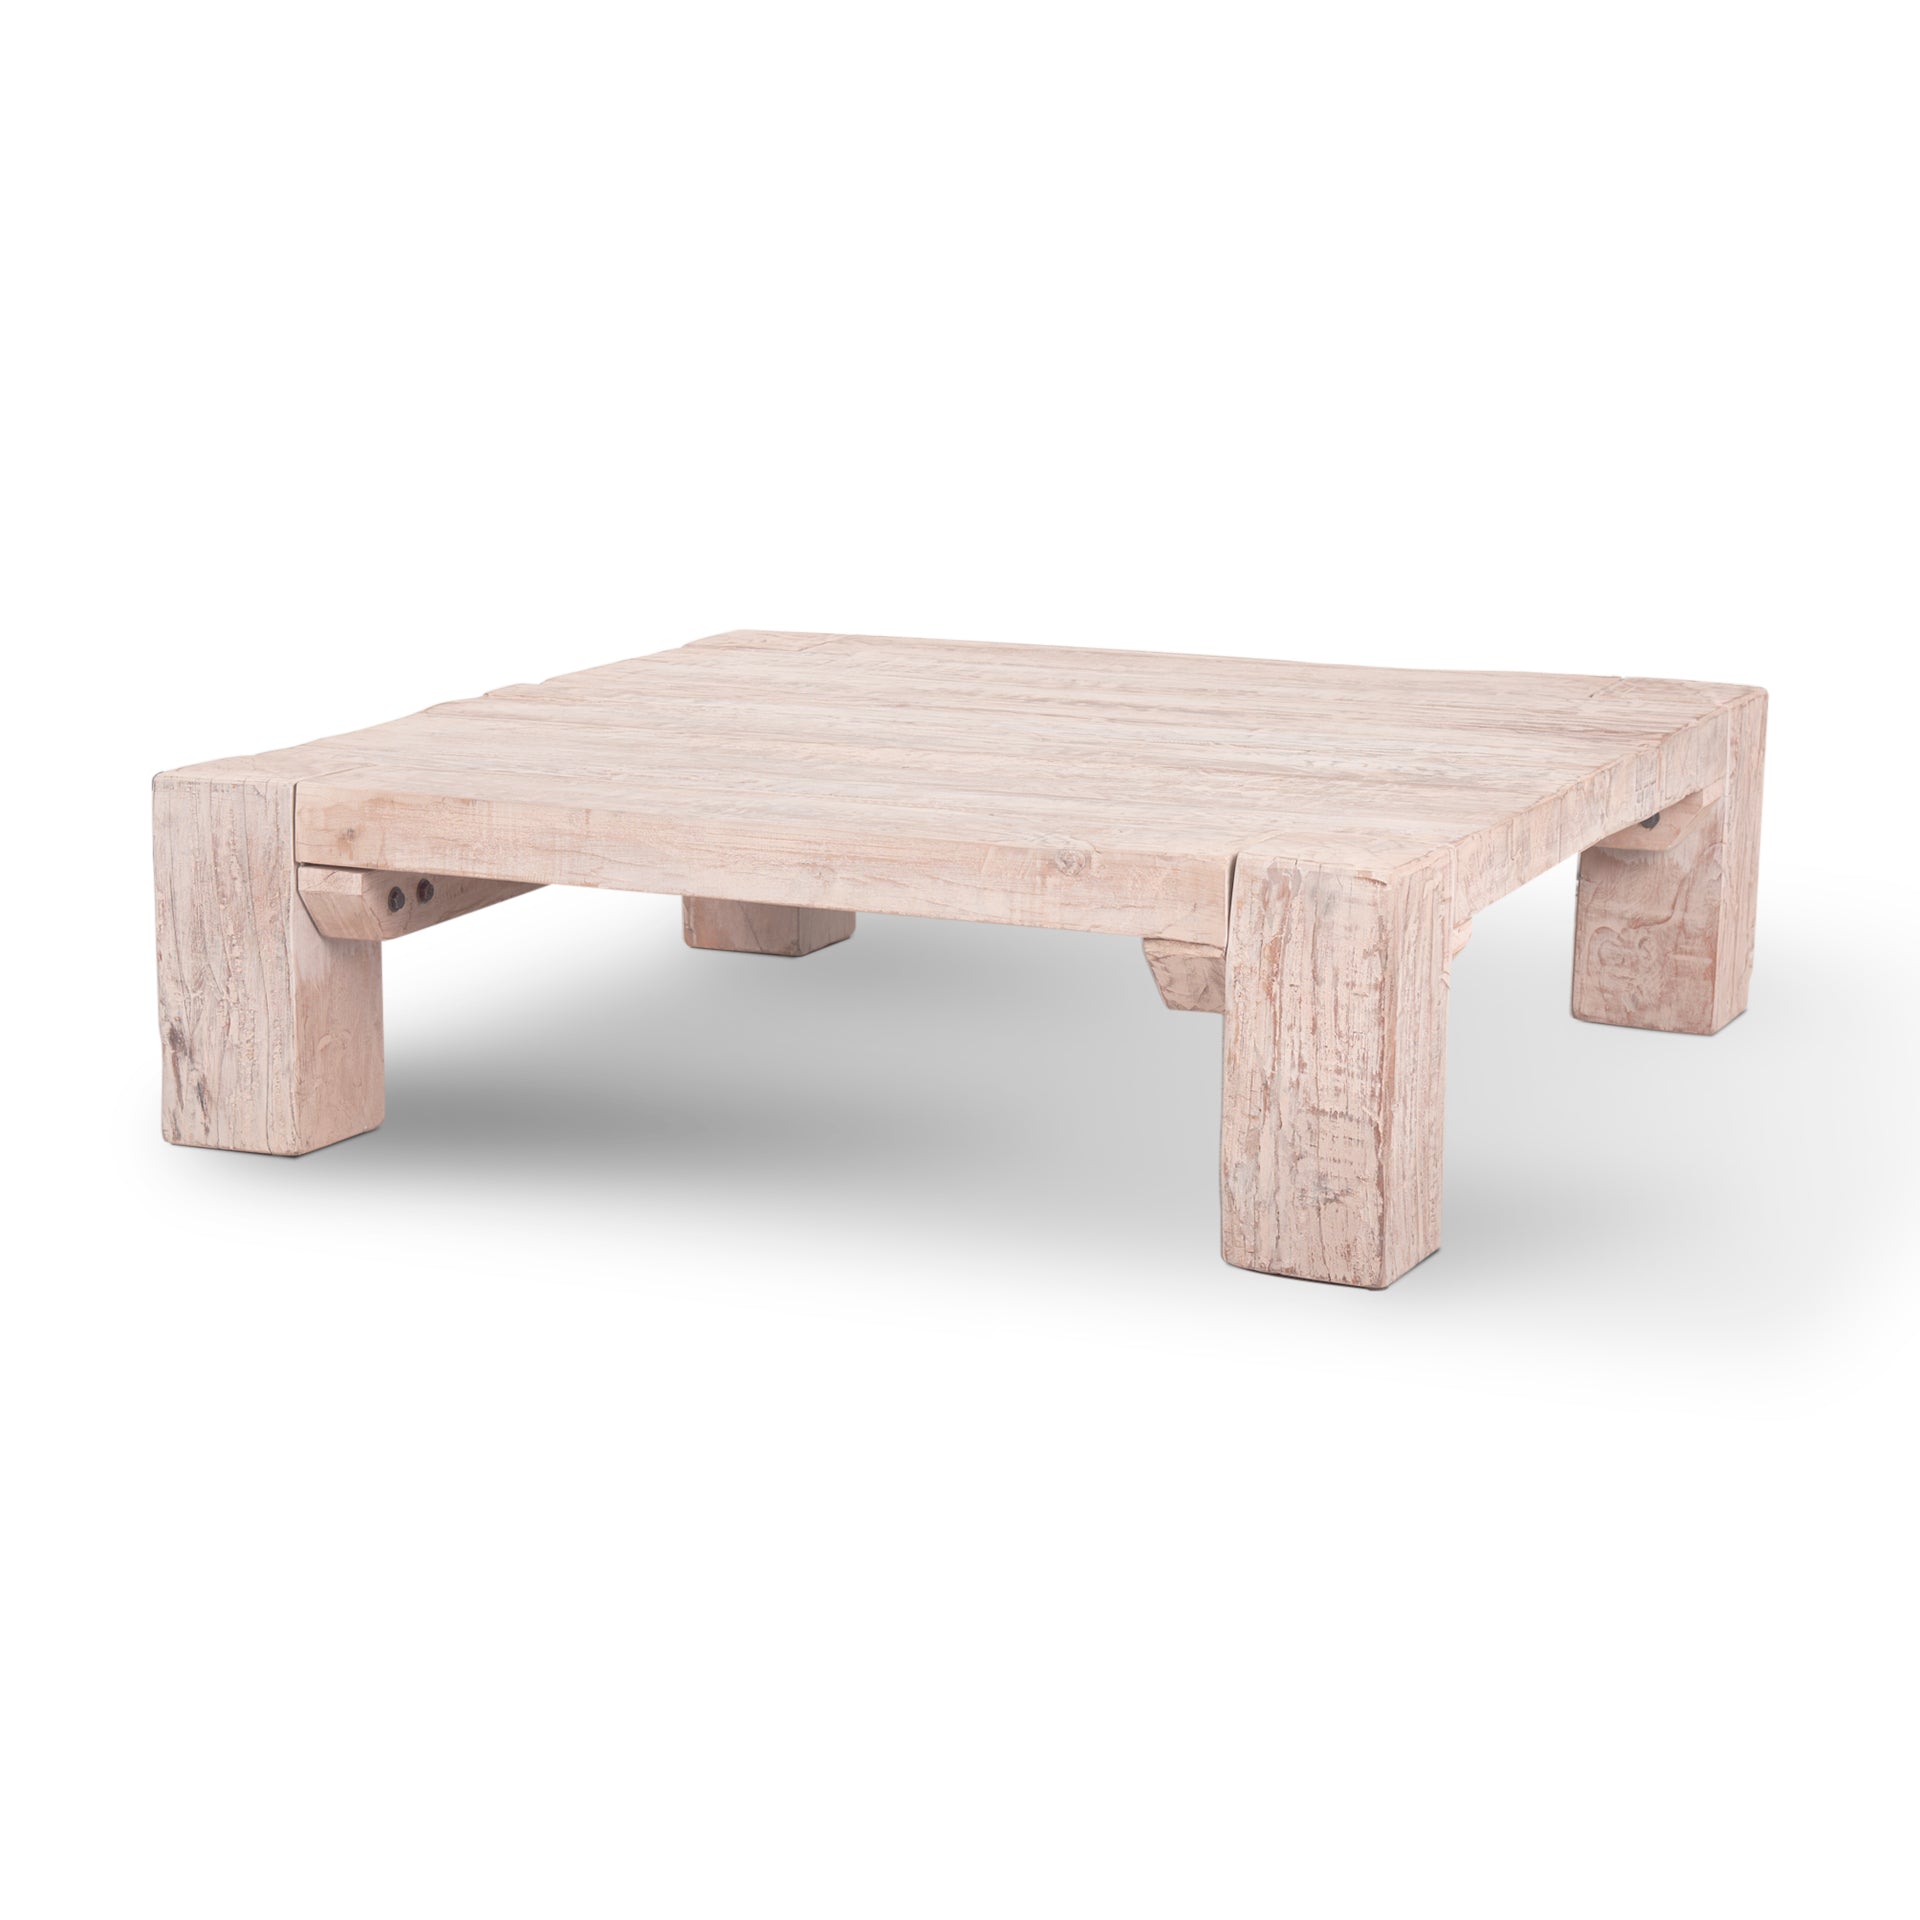 McArthur Square Brown Reclaimed Solid Wood Coffee Table